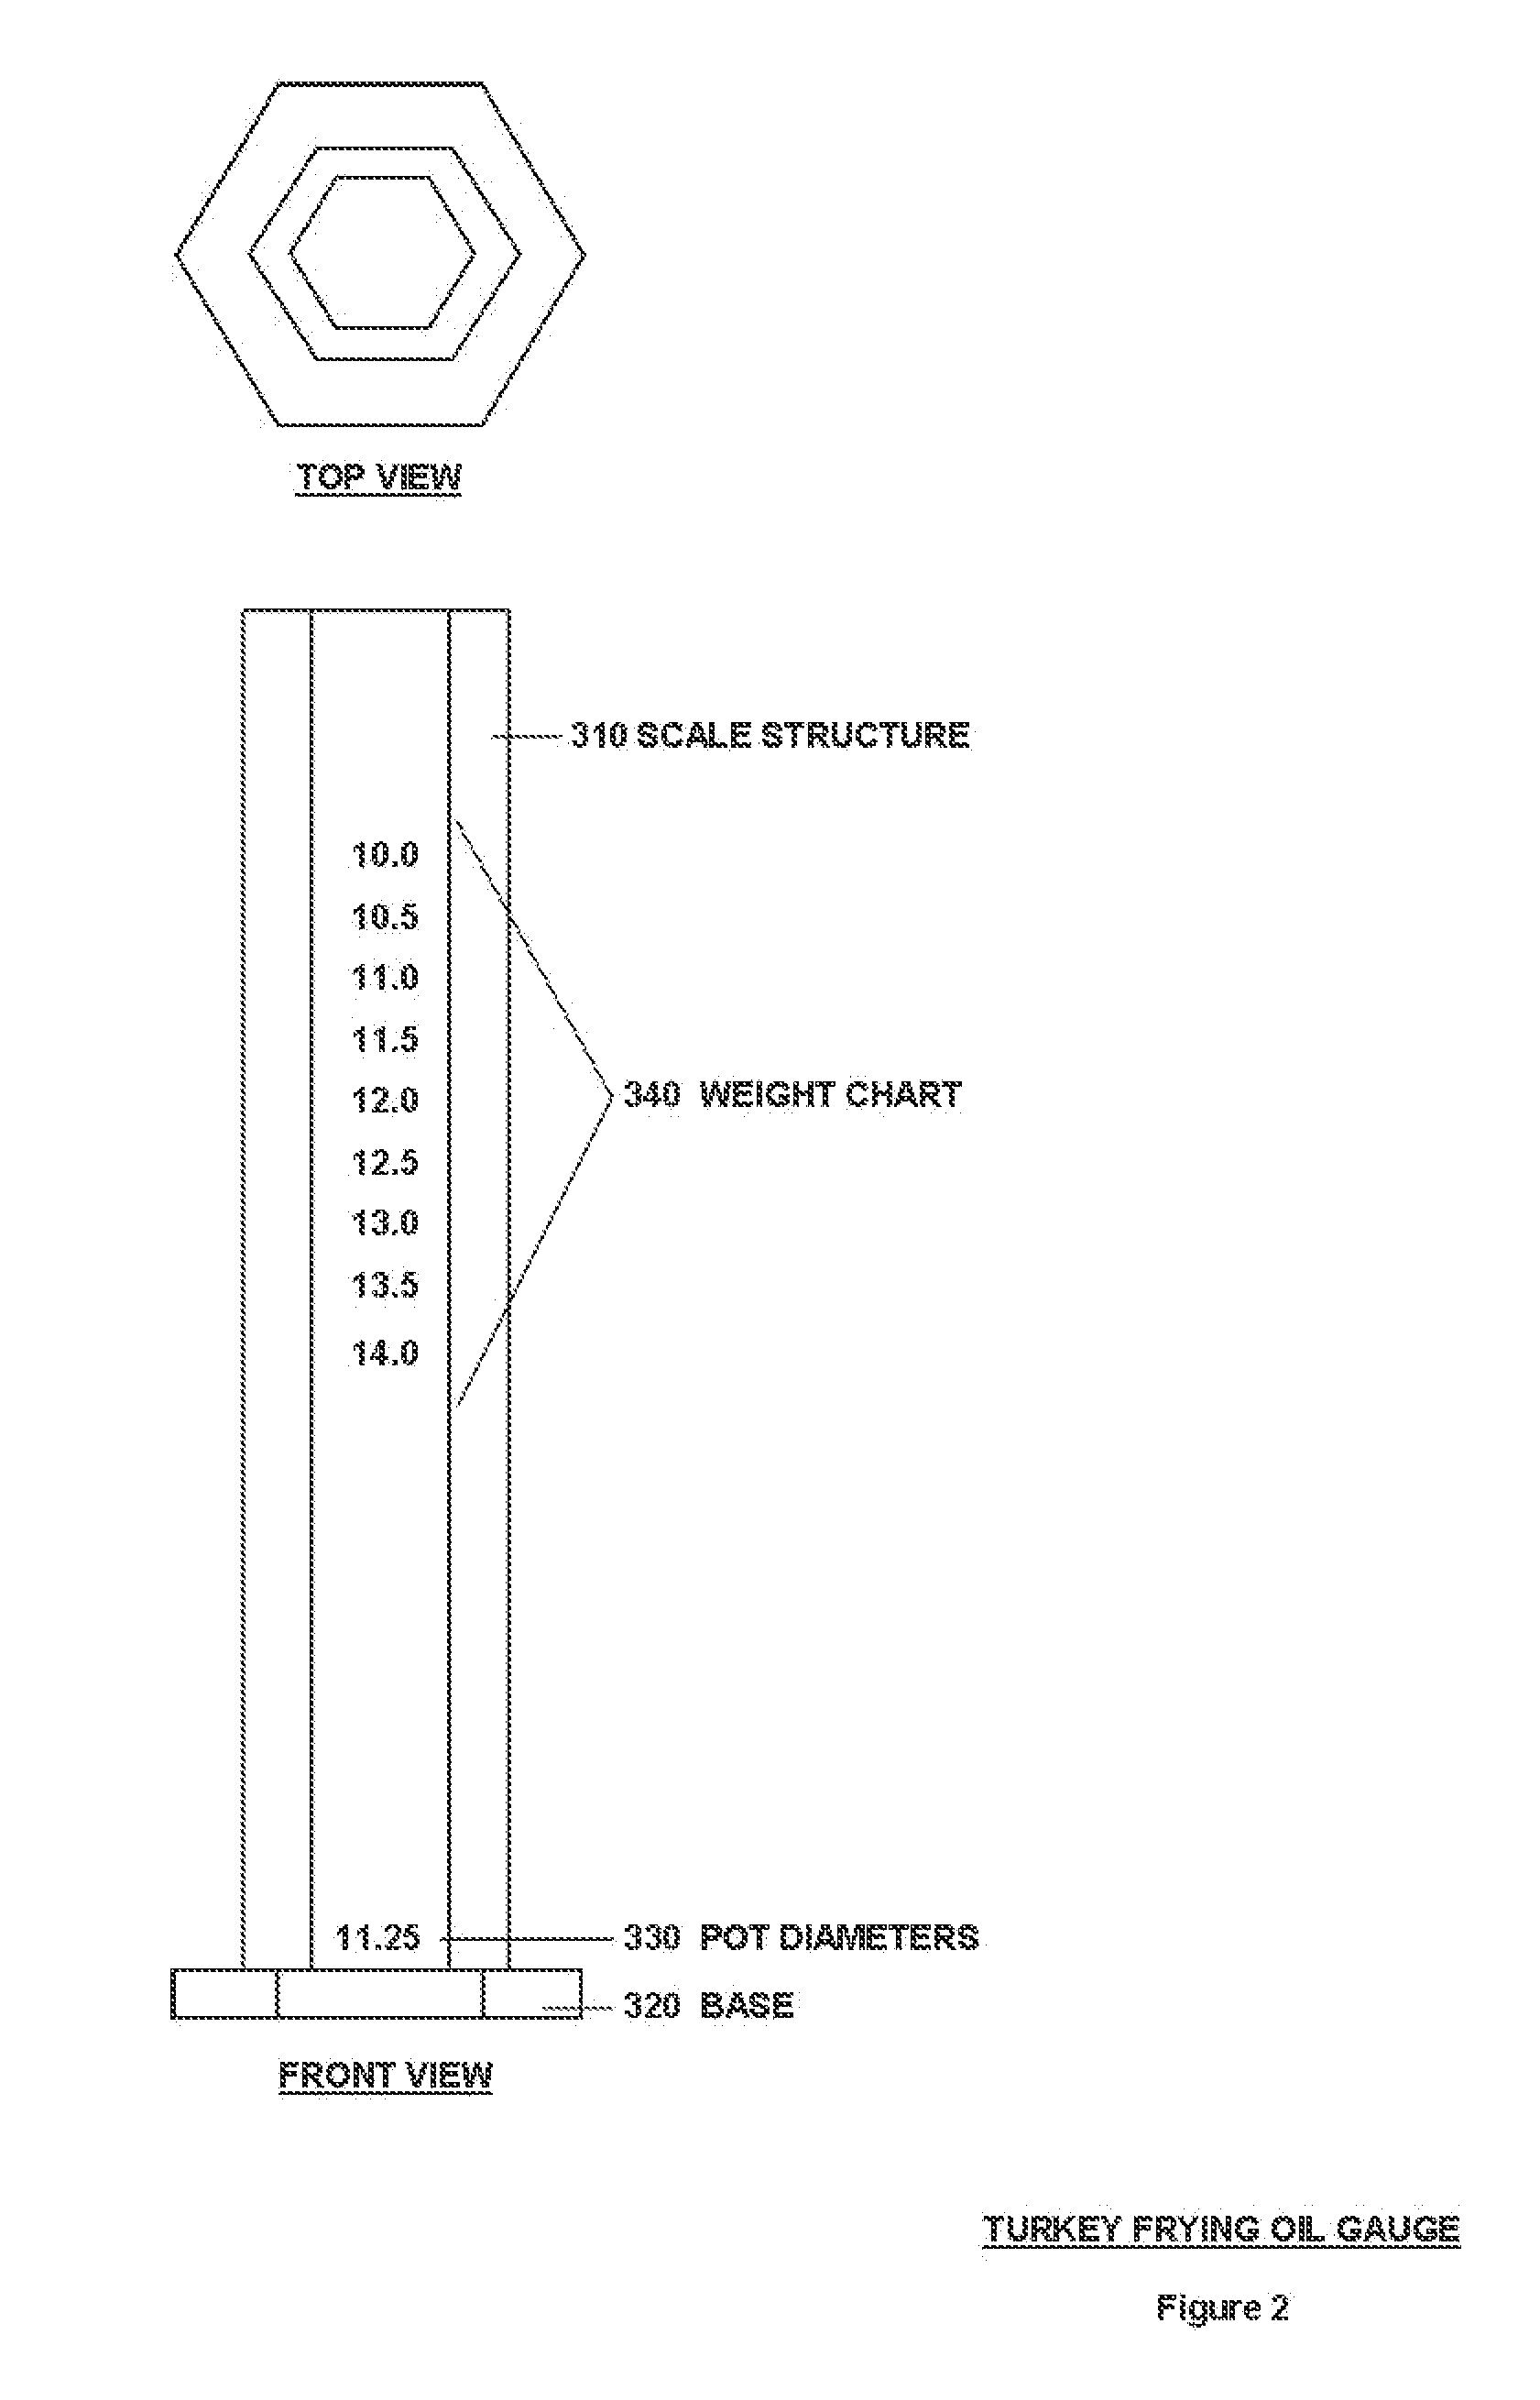 Apparatus and method for properly pre-measuring turkey frying oil